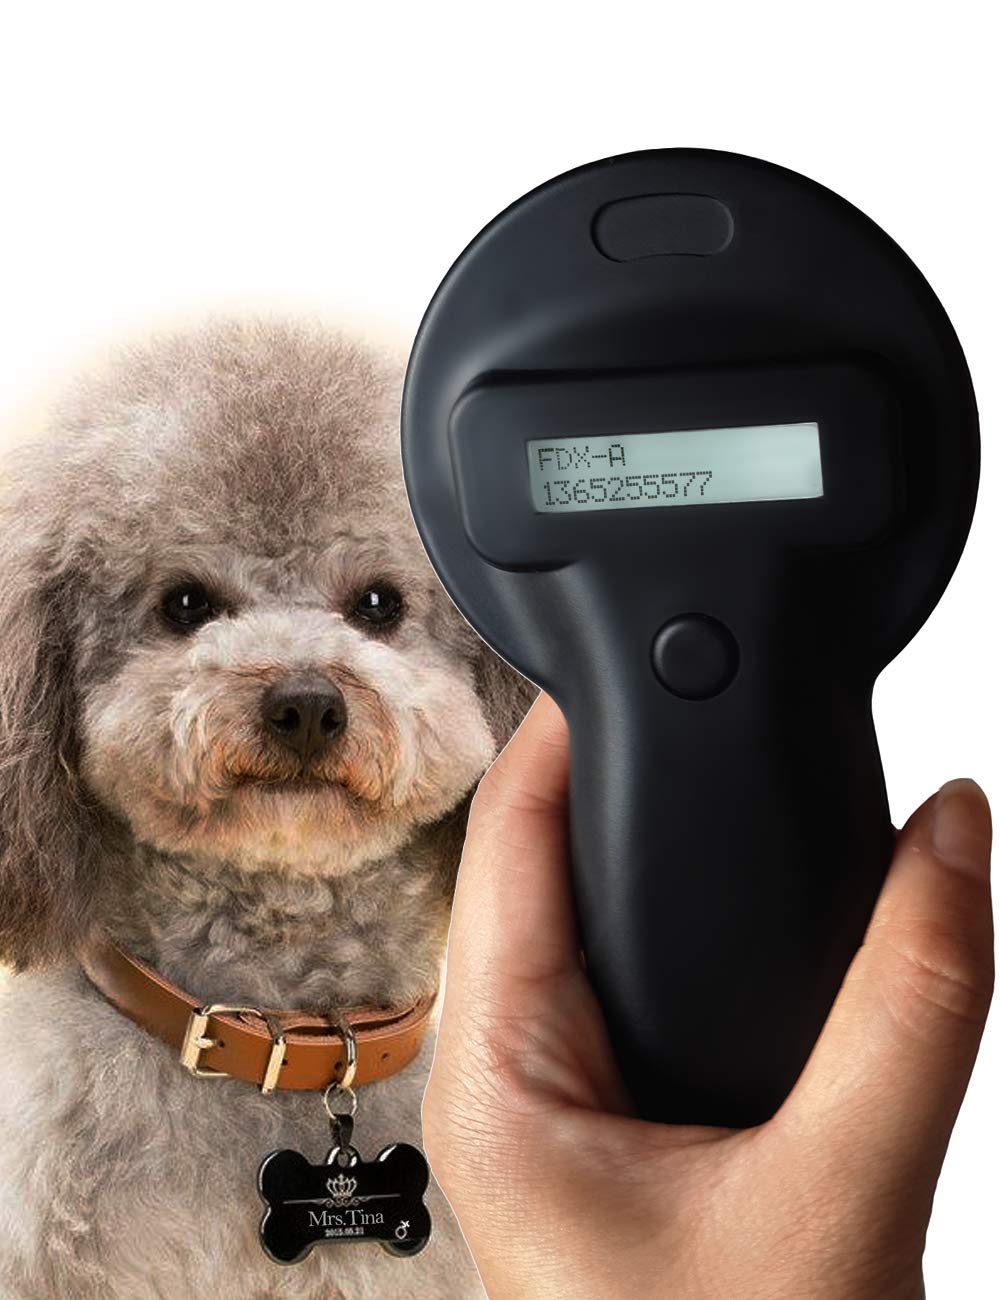 Pet Microchip Scanner Supporting 10 Digit Chips and 15 Digit Chips,Stores up to 8000 Data Records